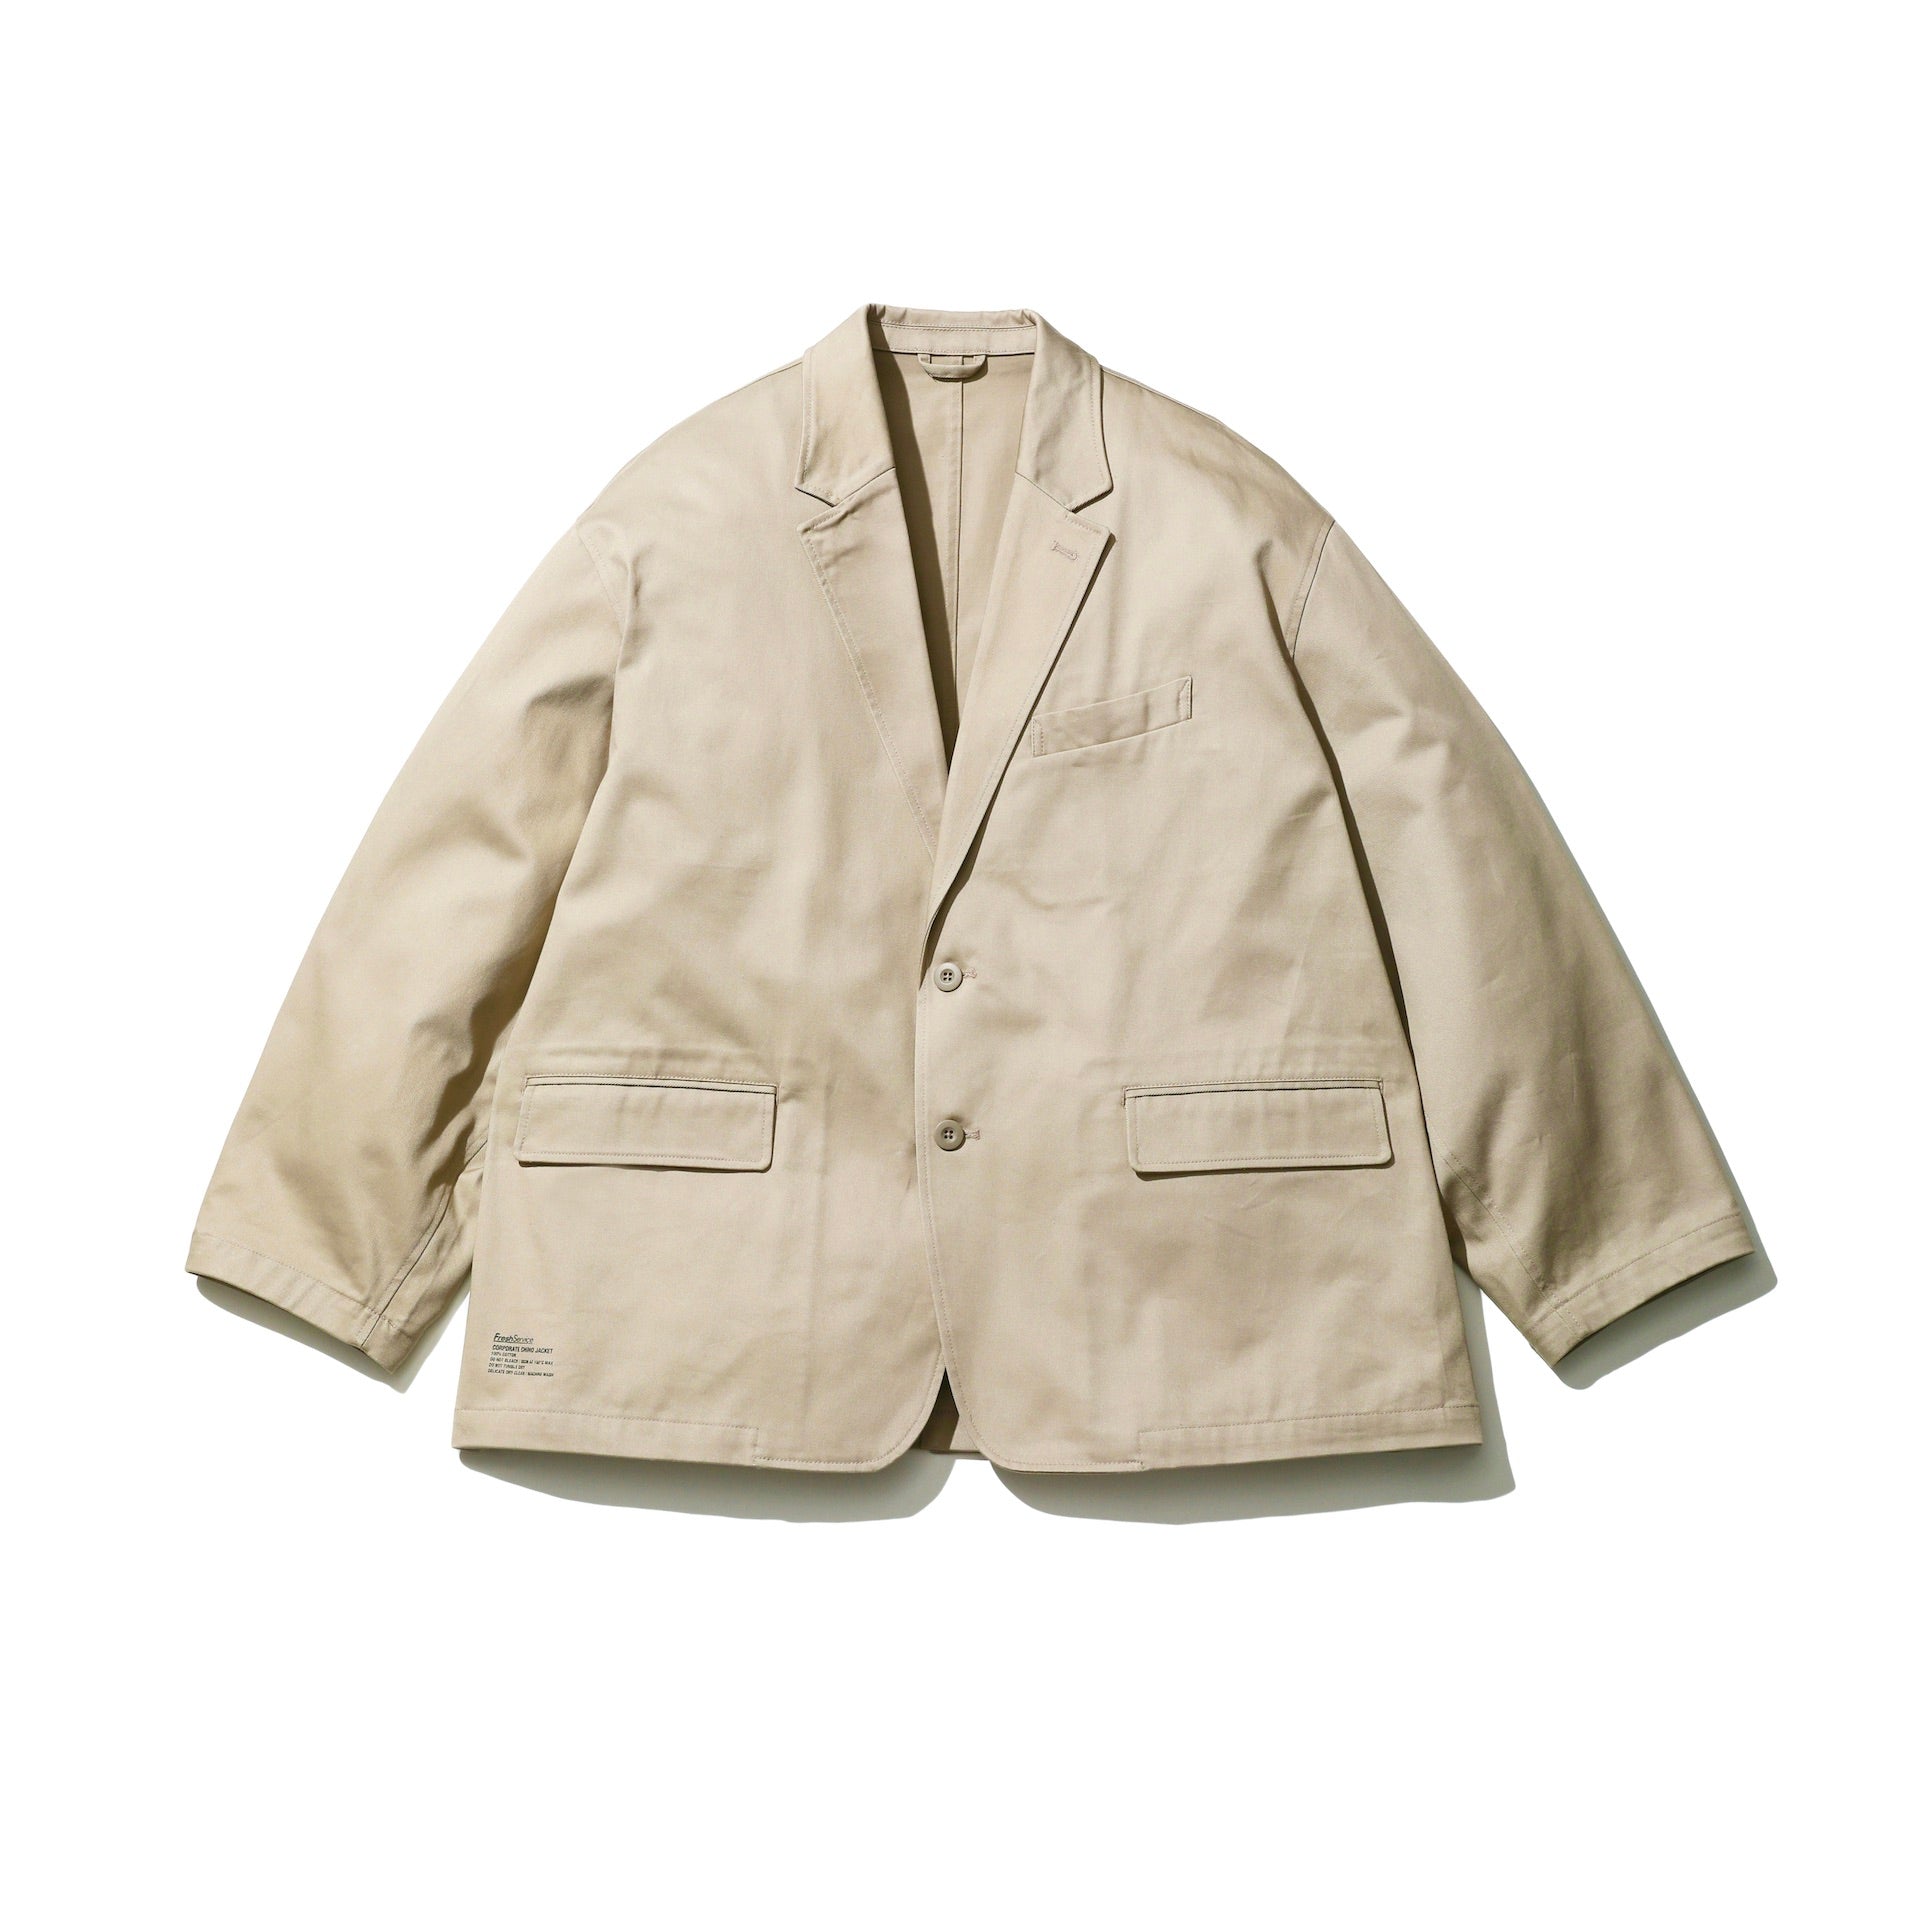 CORPORATE CHINO JACKET – TIME AFTER TIME